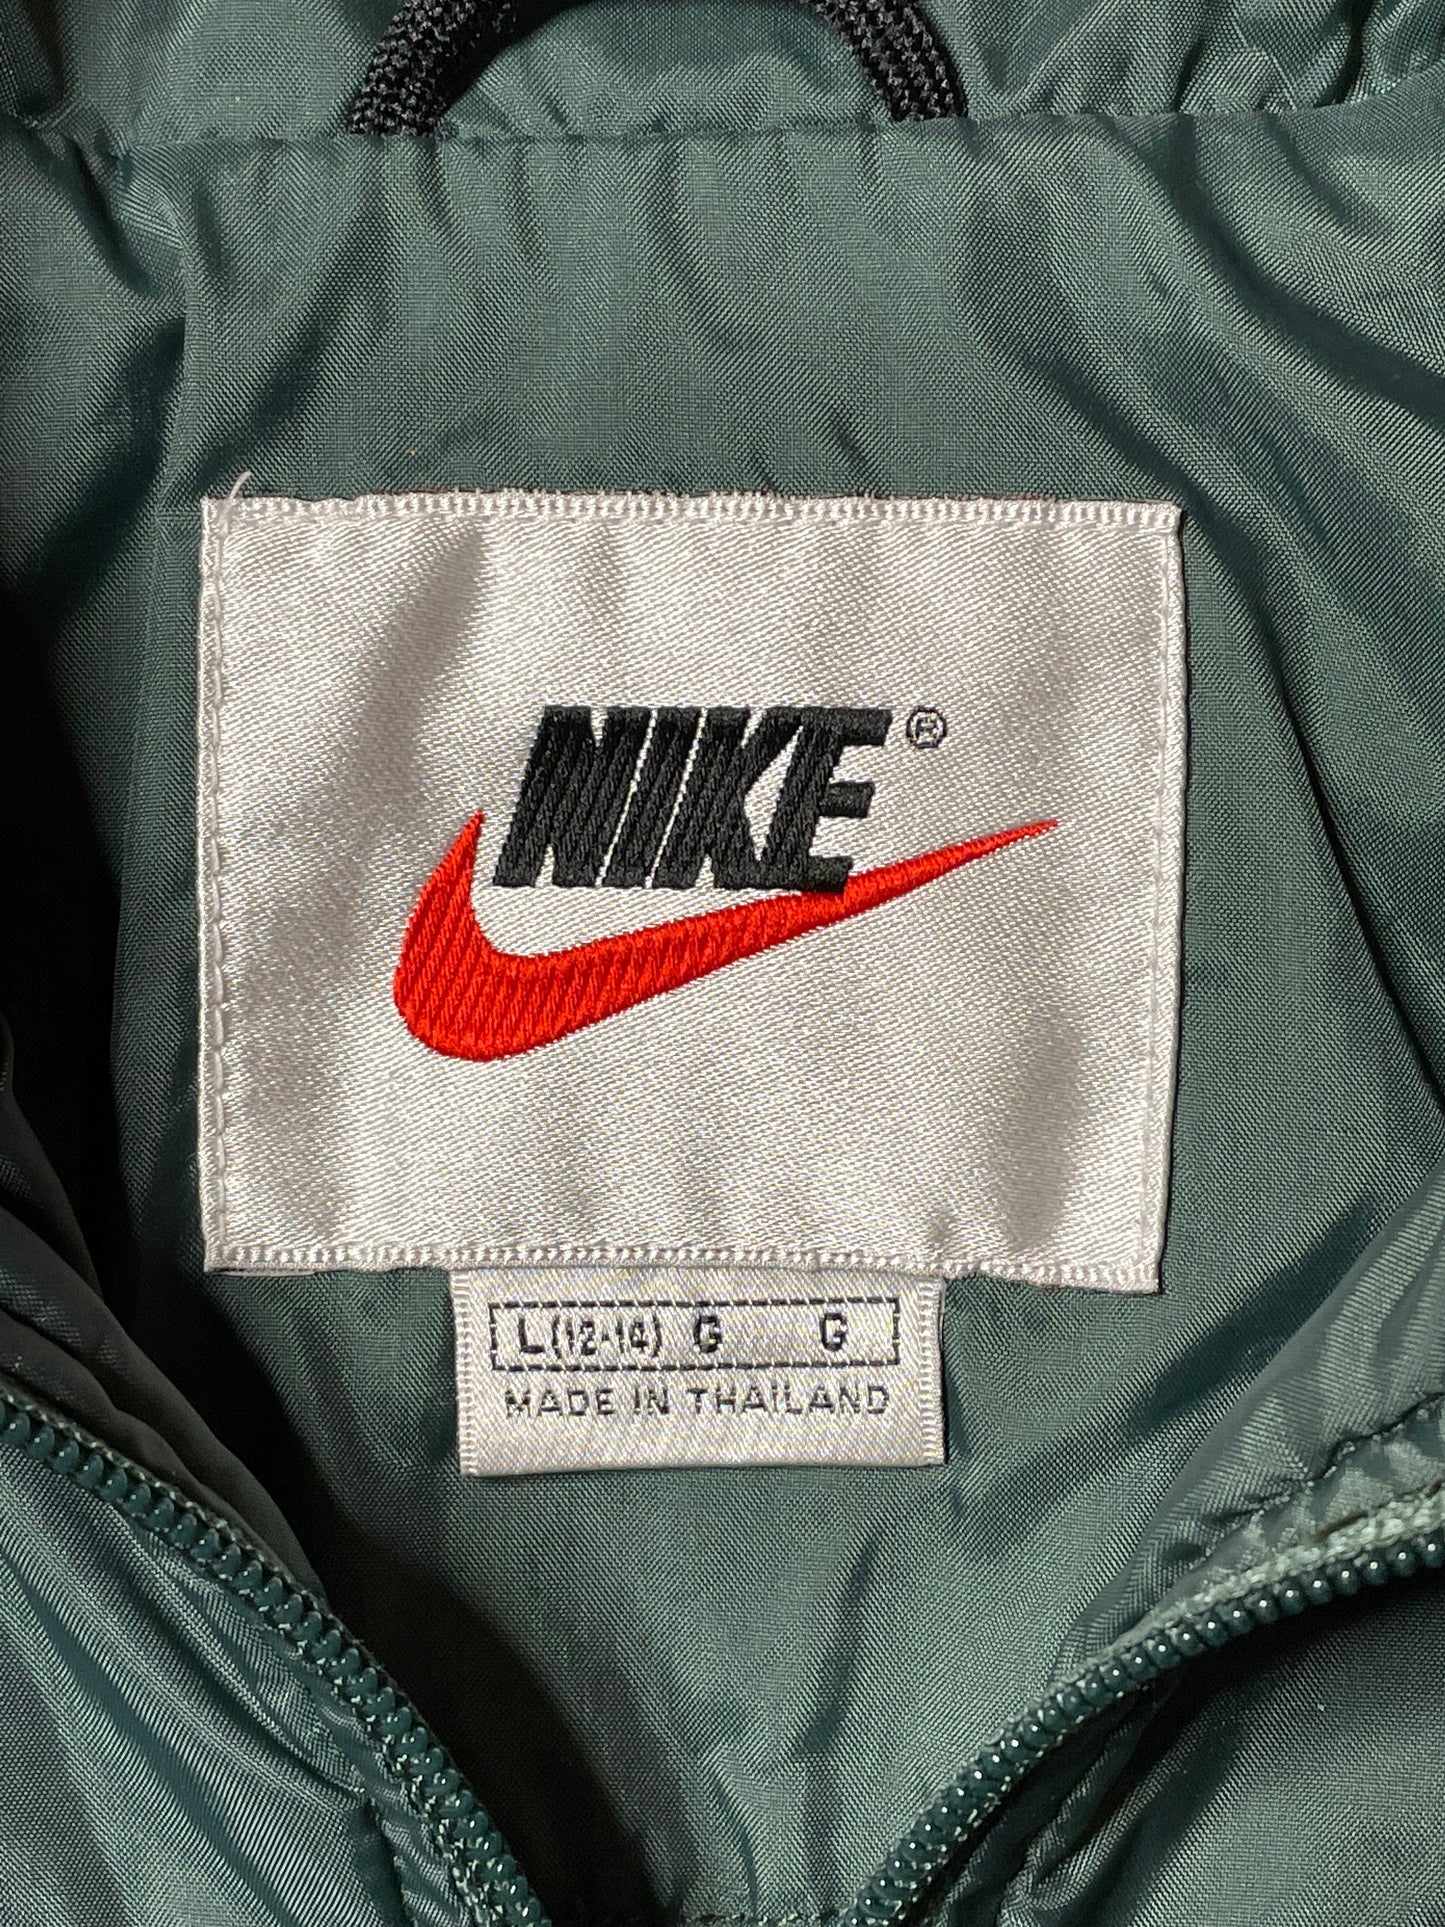 1990s Nike Track Suit